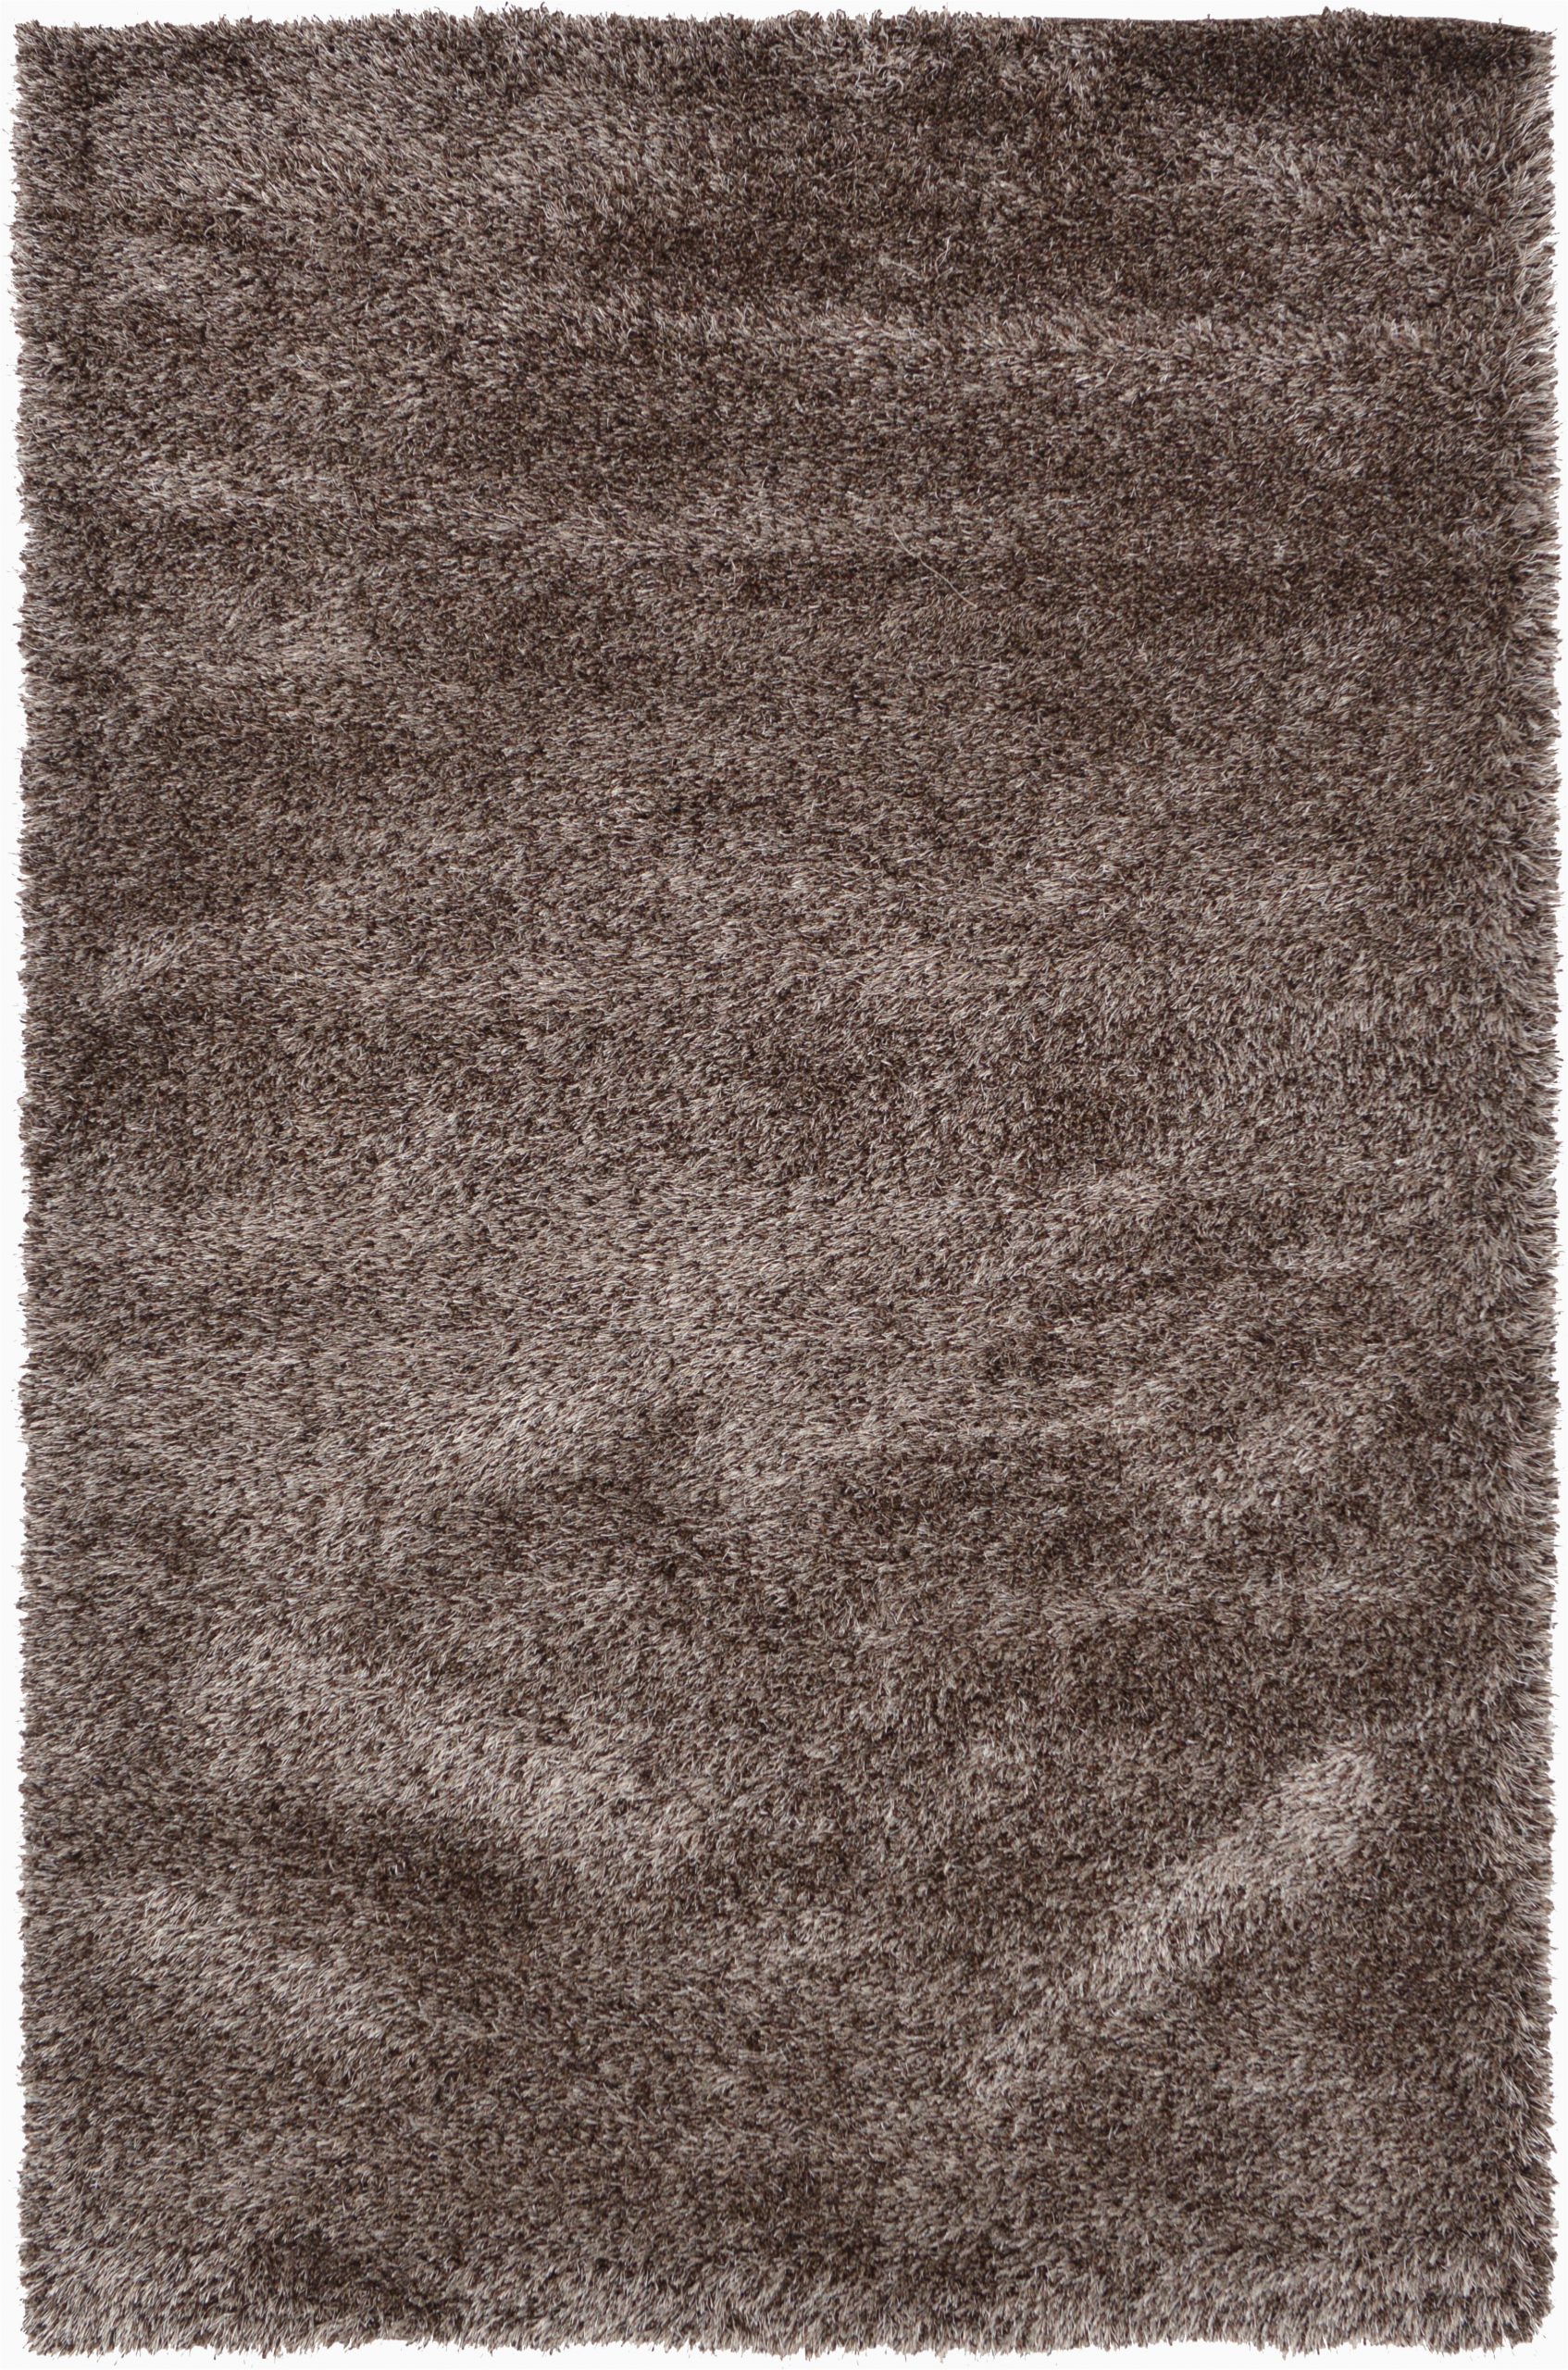 Gray Brown and White area Rug Evelyn Shag Brown Gray White area Rug